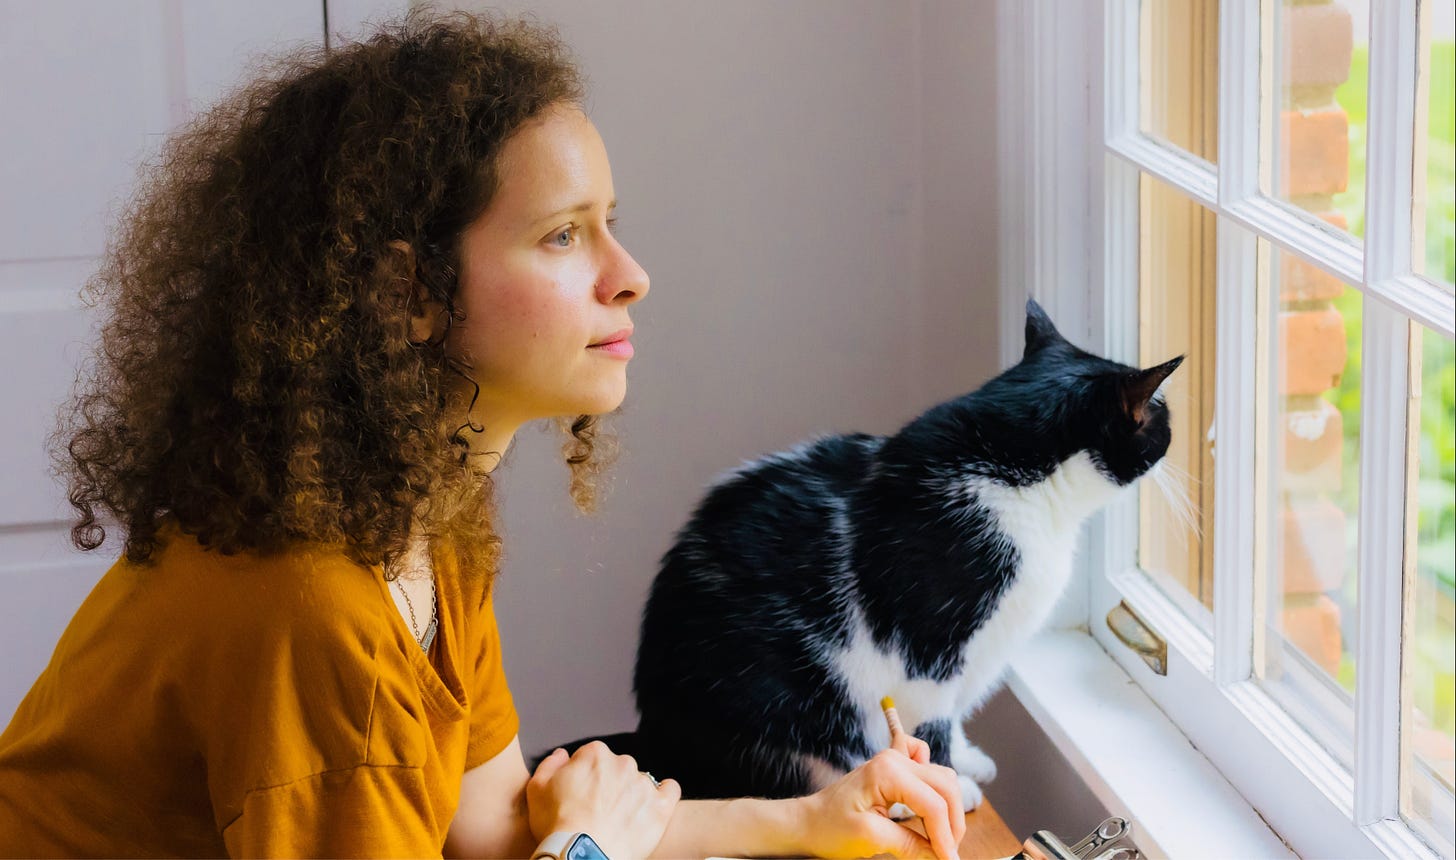 Beth Spencer and her black and white cat, looking out a window together